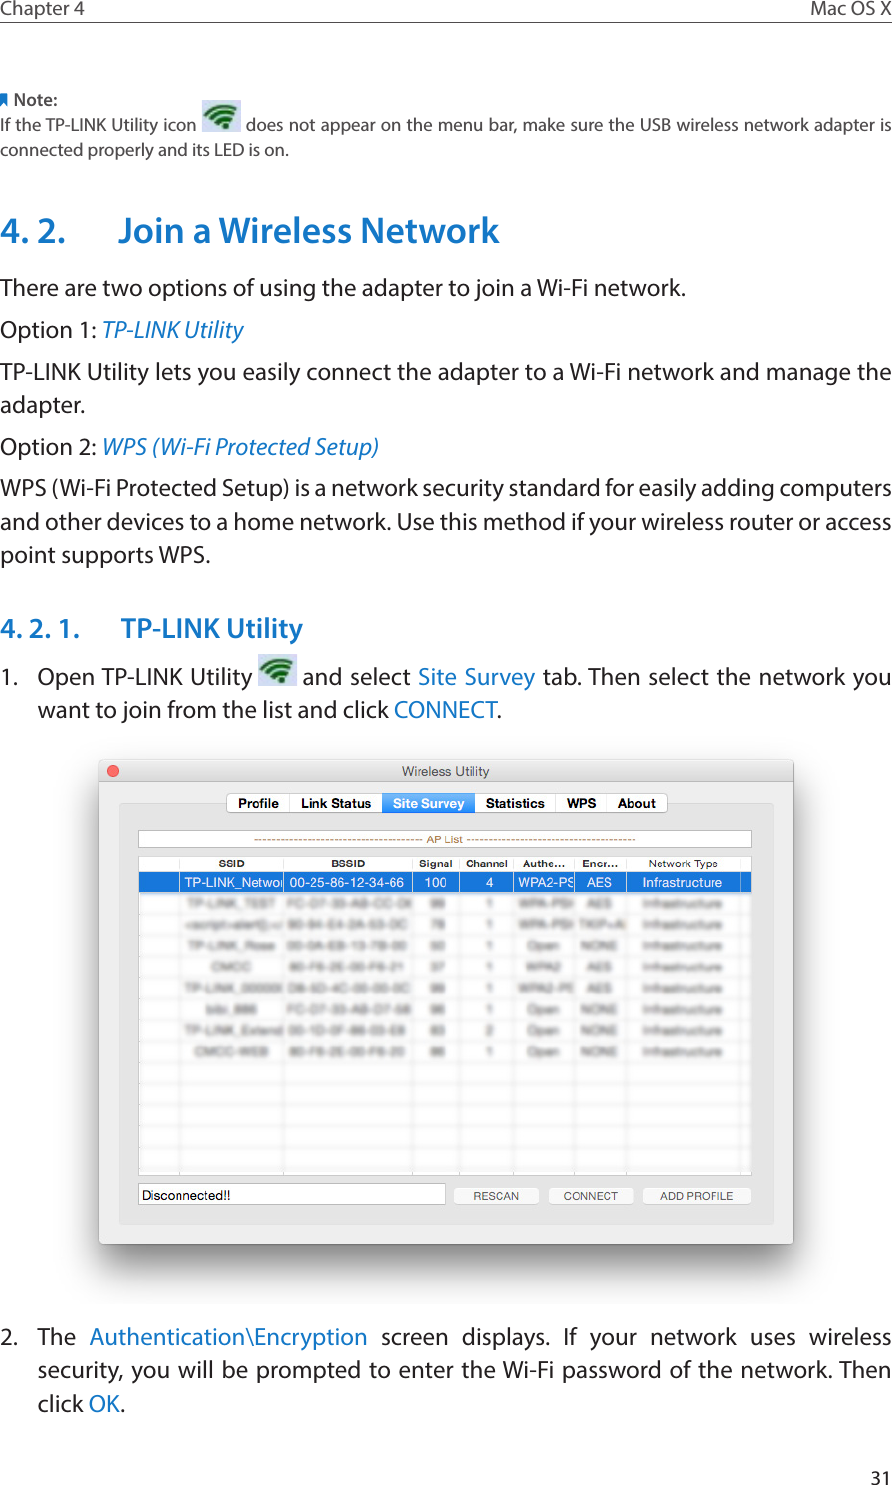 31Chapter 4 Mac OS XNote:If the TP-LINK Utility icon   does not appear on the menu bar, make sure the USB wireless network adapter is connected properly and its LED is on.4. 2.  Join a Wireless NetworkThere are two options of using the adapter to join a Wi-Fi network.Option 1: TP-LINK UtilityTP-LINK Utility lets you easily connect the adapter to a Wi-Fi network and manage the adapter.Option 2: WPS (Wi-Fi Protected Setup)WPS (Wi-Fi Protected Setup) is a network security standard for easily adding computers and other devices to a home network. Use this method if your wireless router or access point supports WPS. 4. 2. 1.  TP-LINK Utility1.  Open TP-LINK Utility   and select Site Survey tab. Then select the network you want to join from the list and click CONNECT.2.  The  Authentication\Encryption screen displays. If your network uses wireless security, you will be prompted to enter the Wi-Fi password of the network. Then click OK.